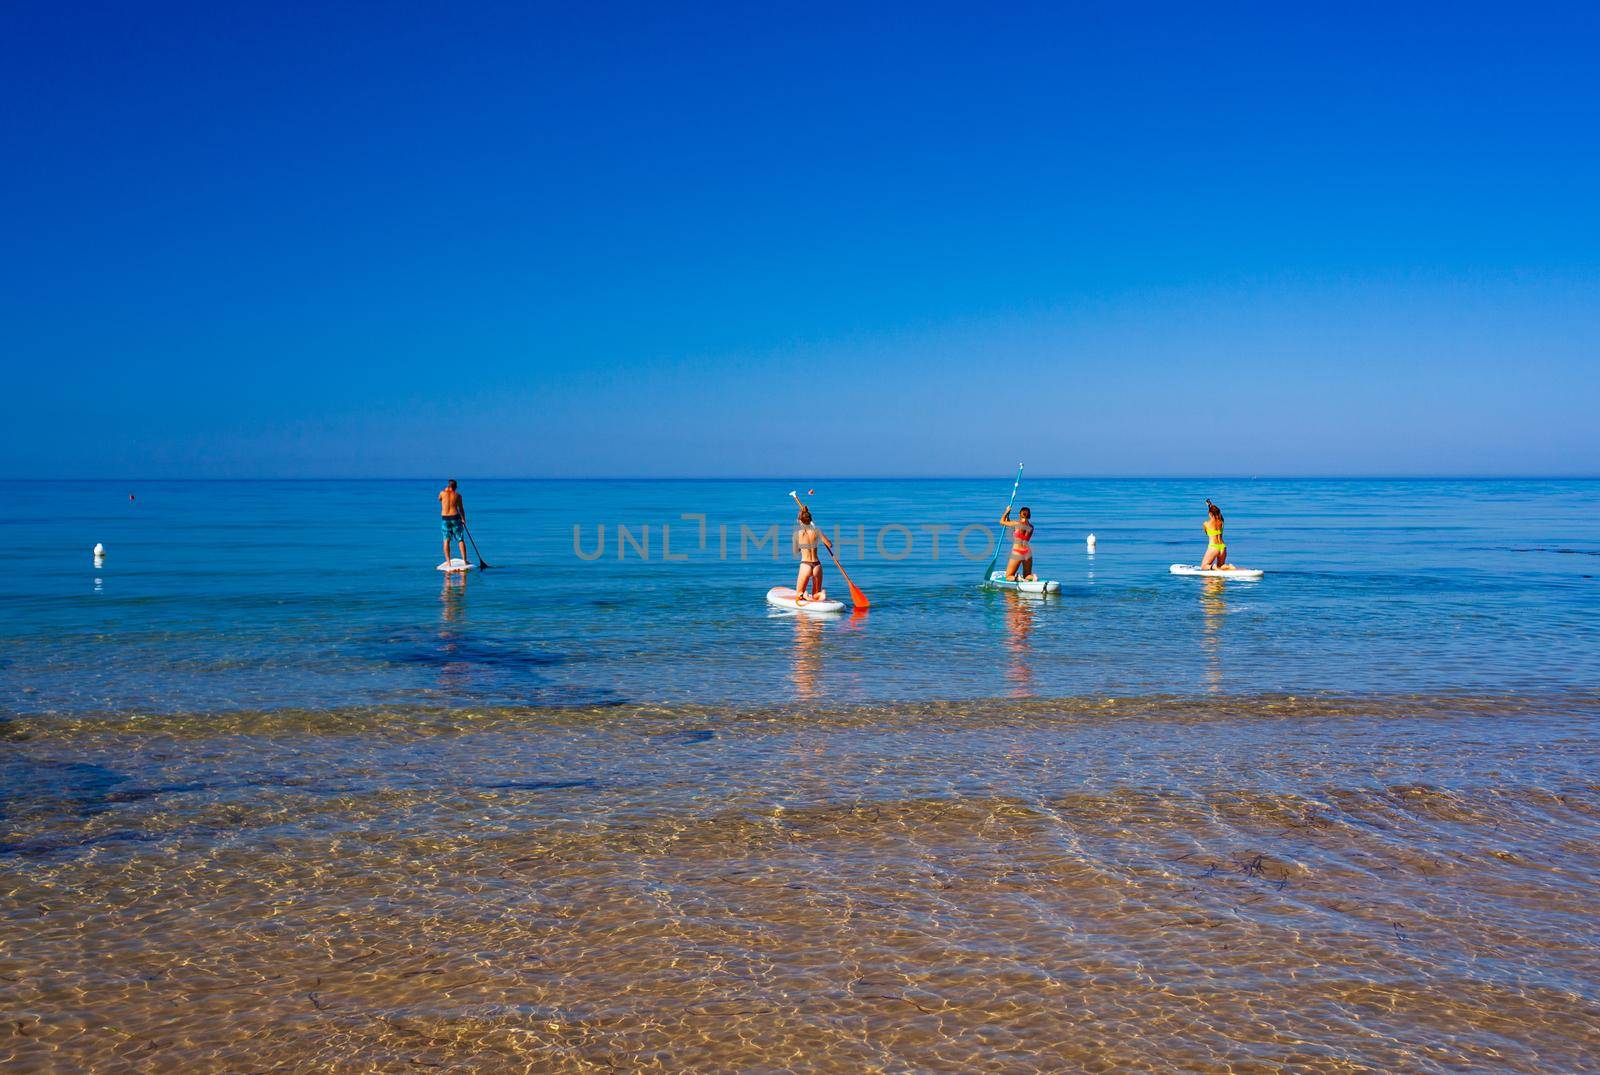 Stand up paddle boarding. Joyful group of friendsare training SUP board in the mediterranean sea on a sunny morning in Realmonte beach, Sicily. Italy